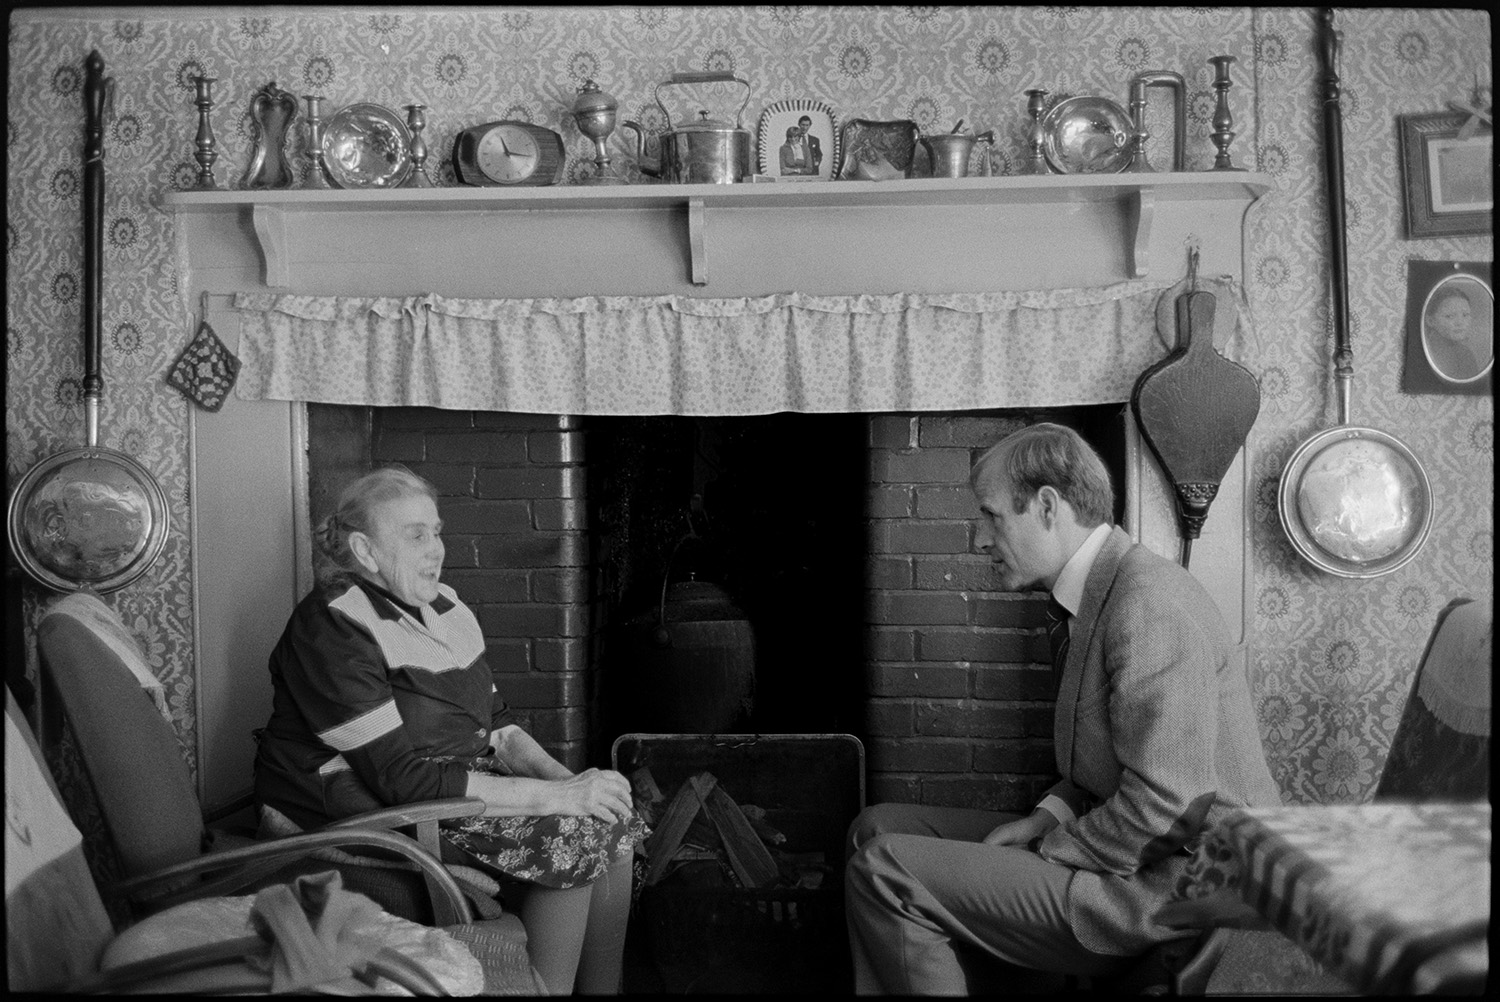 Doctor visiting woman patient, chatting in front of fireplace. Easy chairs and dresser, bellows. 
[Doctor Richard Westcott visiting a patient in her home at Mariansleigh. They are sat on chairs in the living room in front of a fireplace. A display of ornaments, candlesticks and a kettle is on the mantelpiece and a pair of bellows are hung by the fire. The wall is covered with patterned wallpaper and two bed warmers are hung either side of the fireplace.]